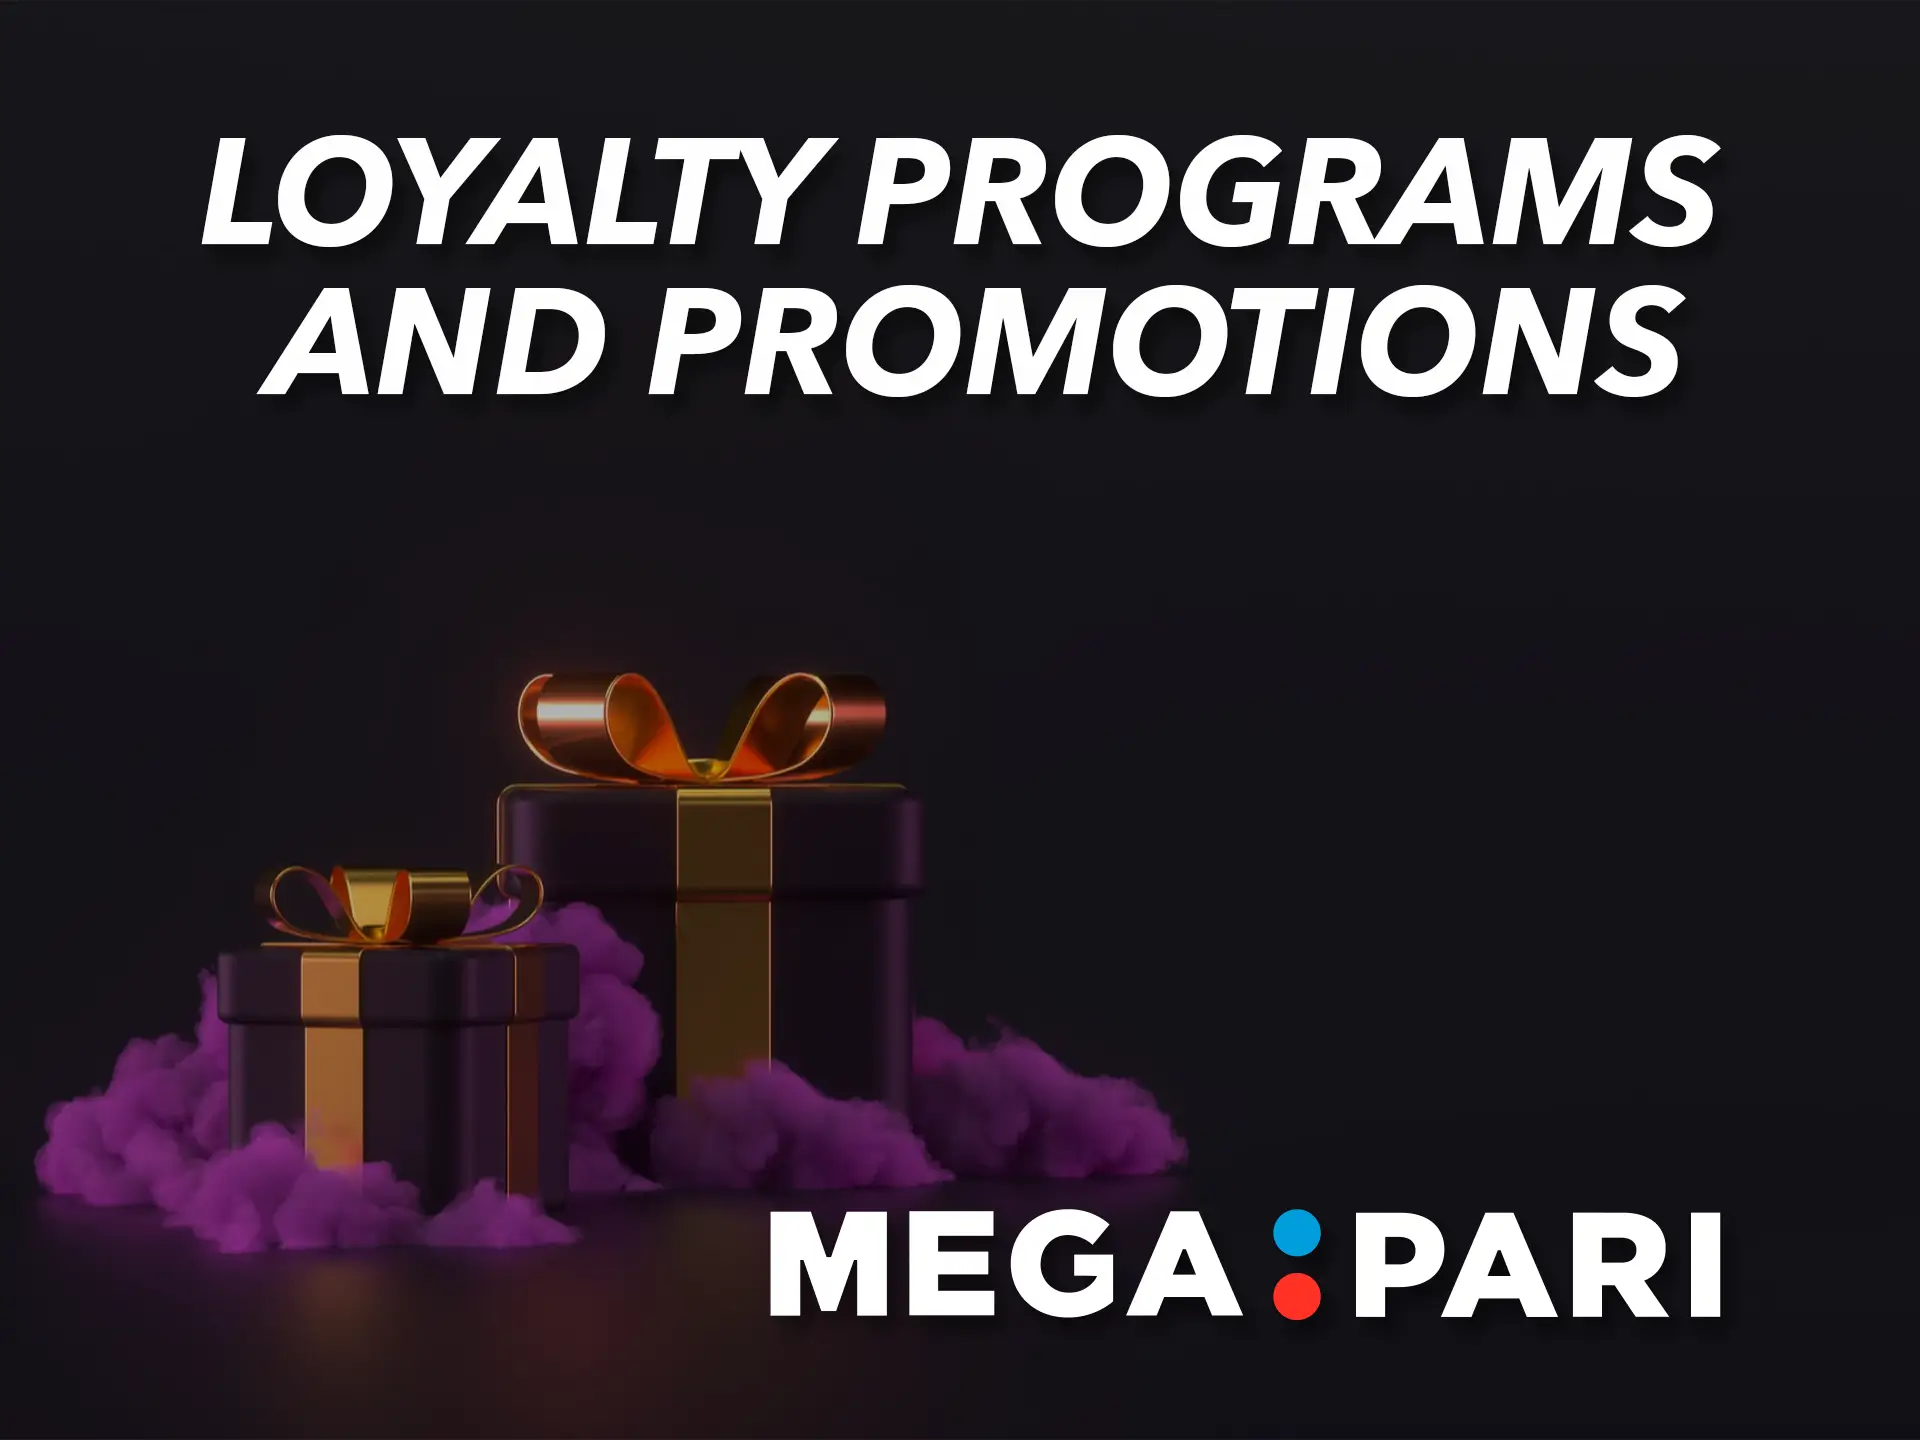 Megapari's wide variety of bonuses allows customers to gain experience and feel confident.